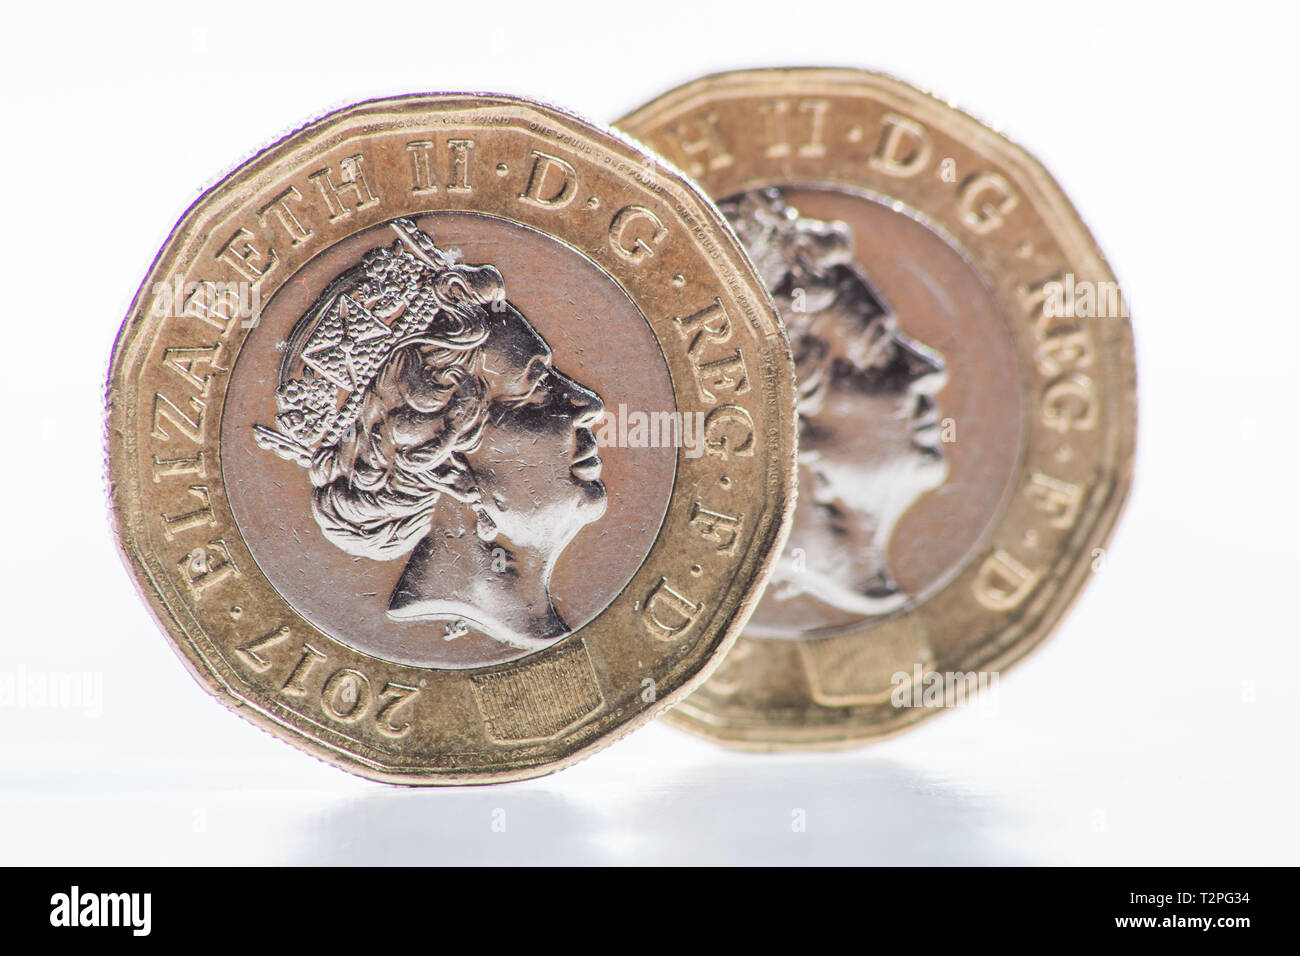 Coins. The One Pound Coin. Stock Photo